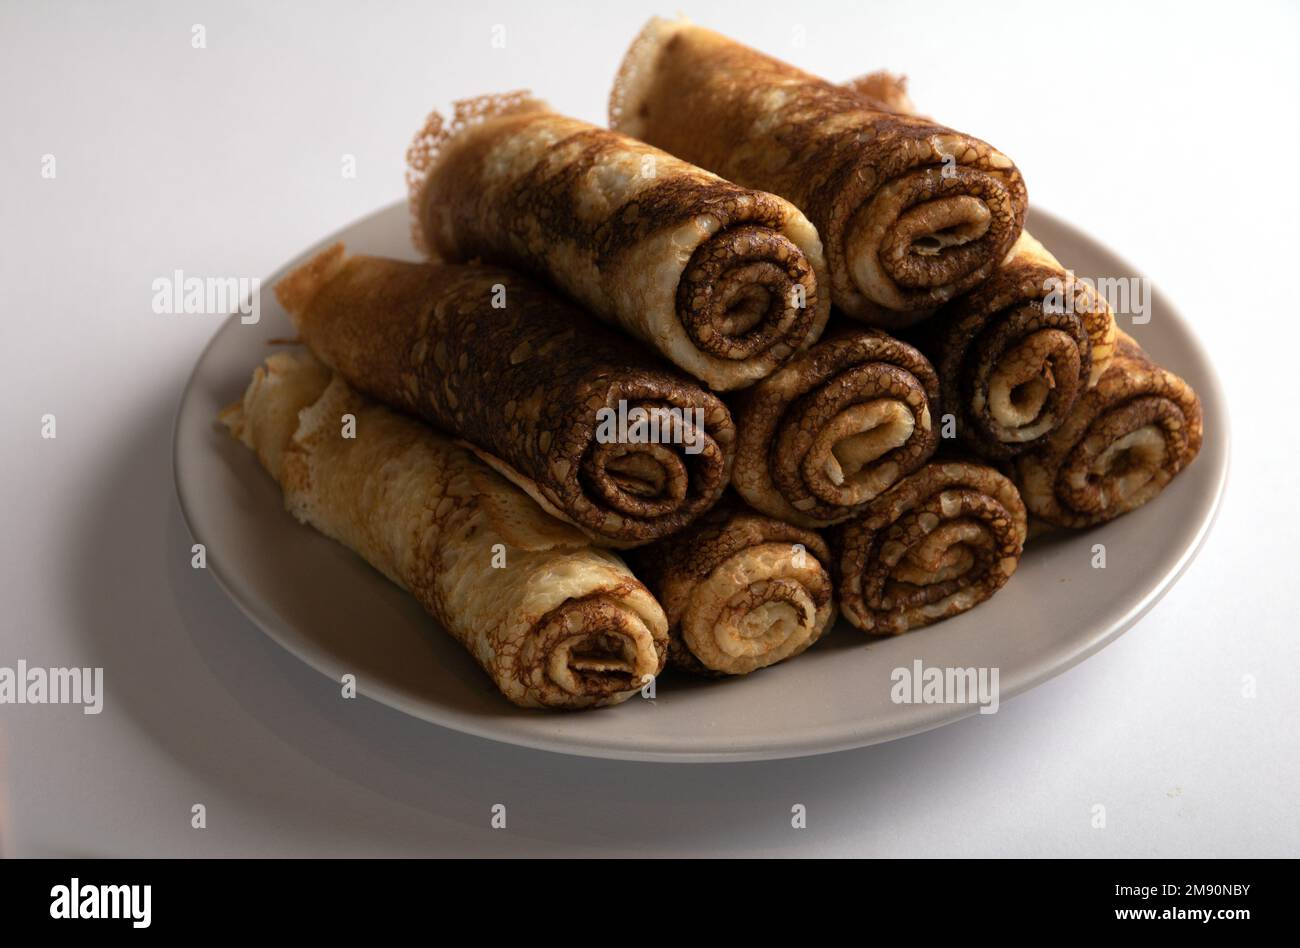 photo pancakes rolled up and lying on a plate on a white background Stock Photo